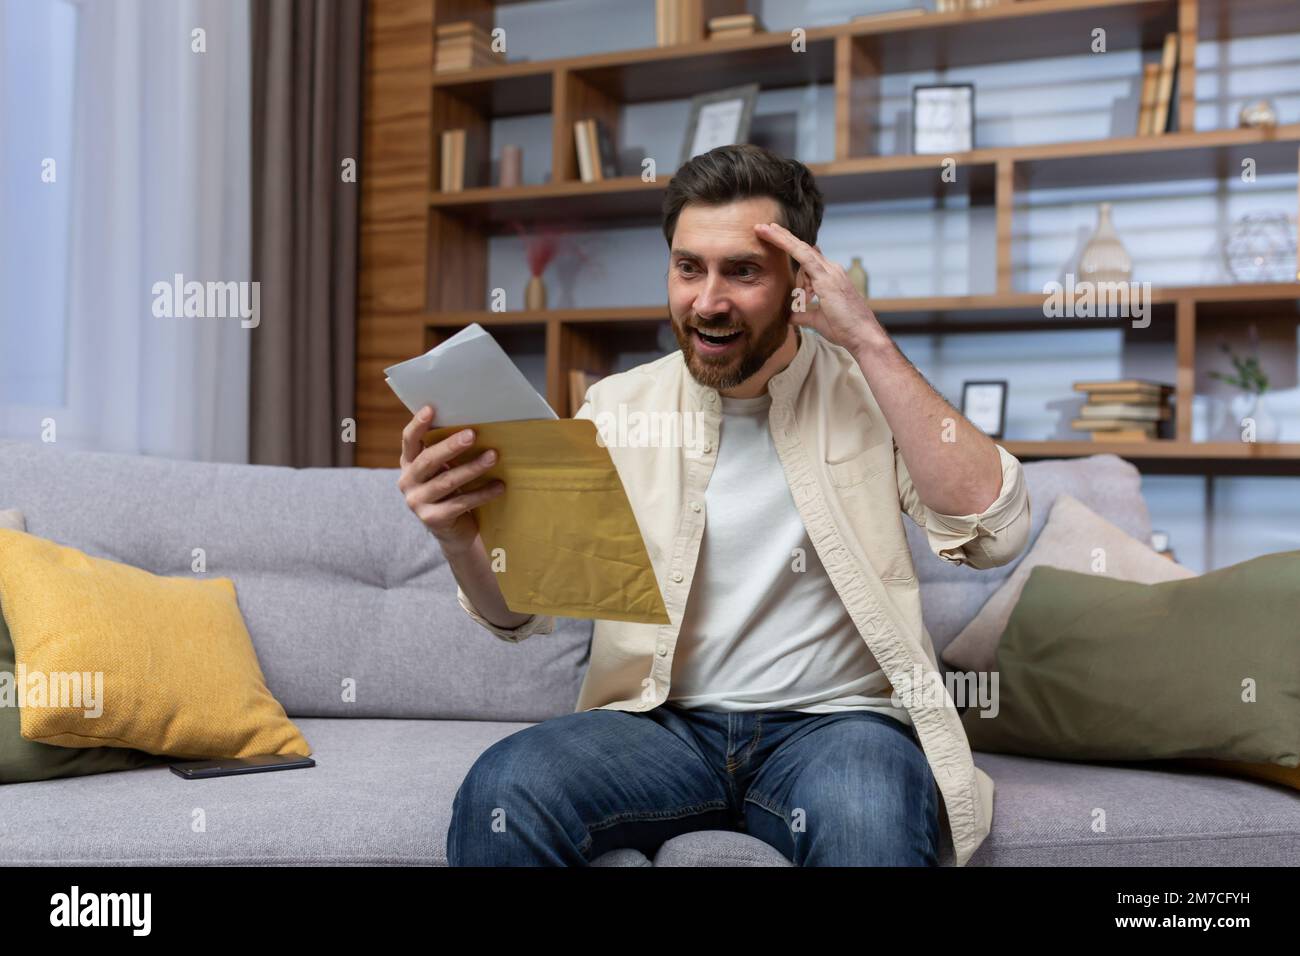 Joyful man at home holding envelope with notification message reading and smiling happy with news sitting on sofa inside living room. Stock Photo